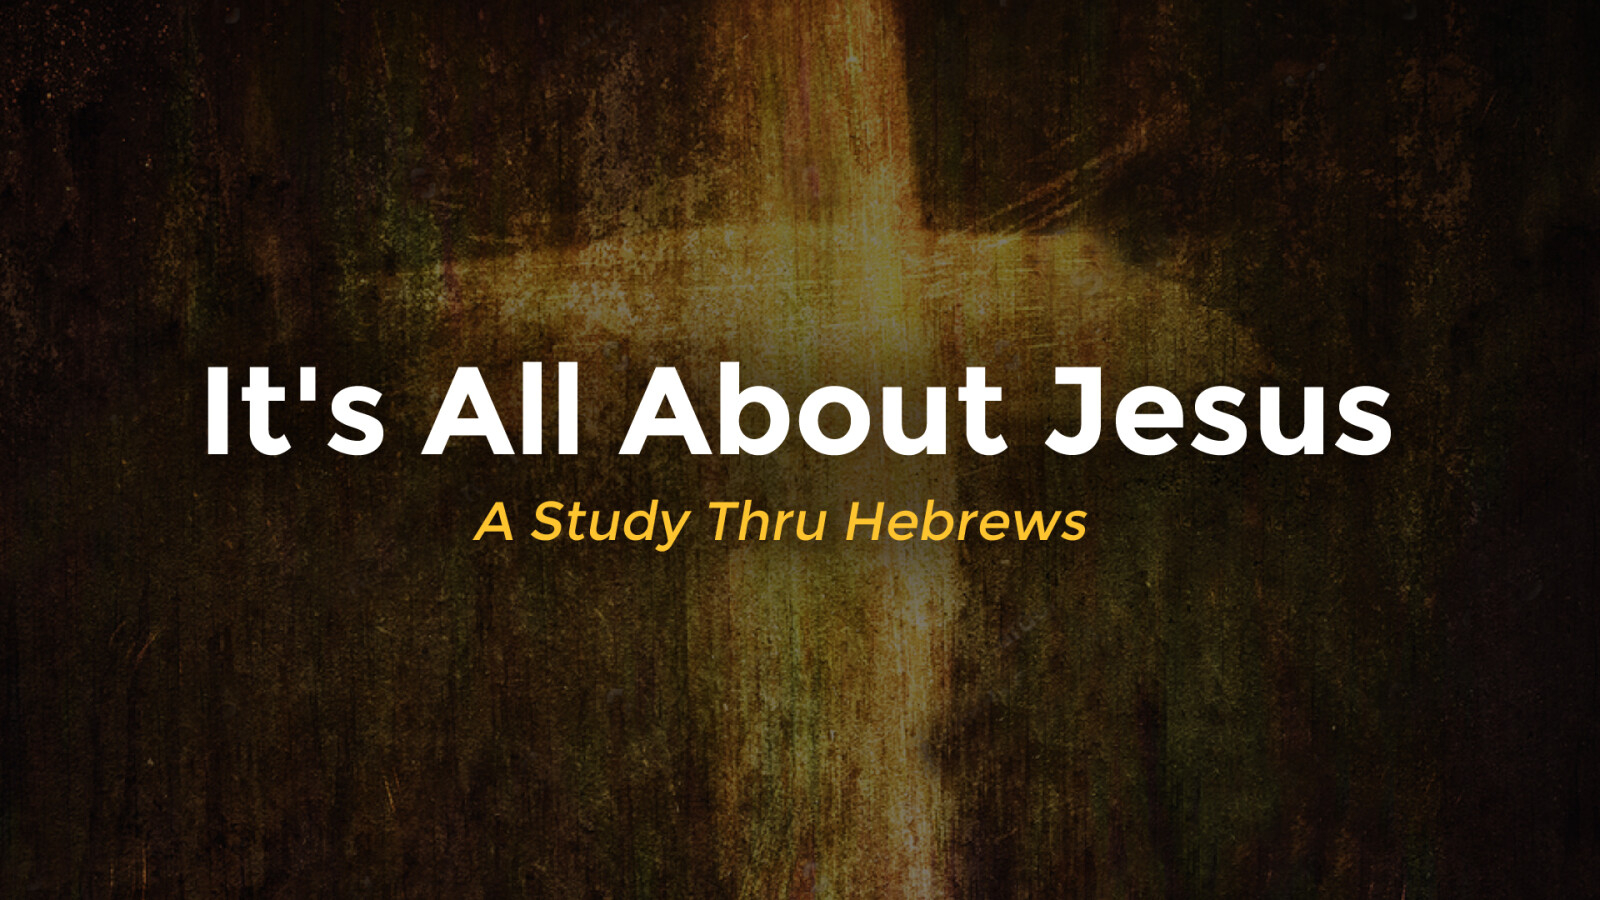 Hebrews- It's All About Jesus